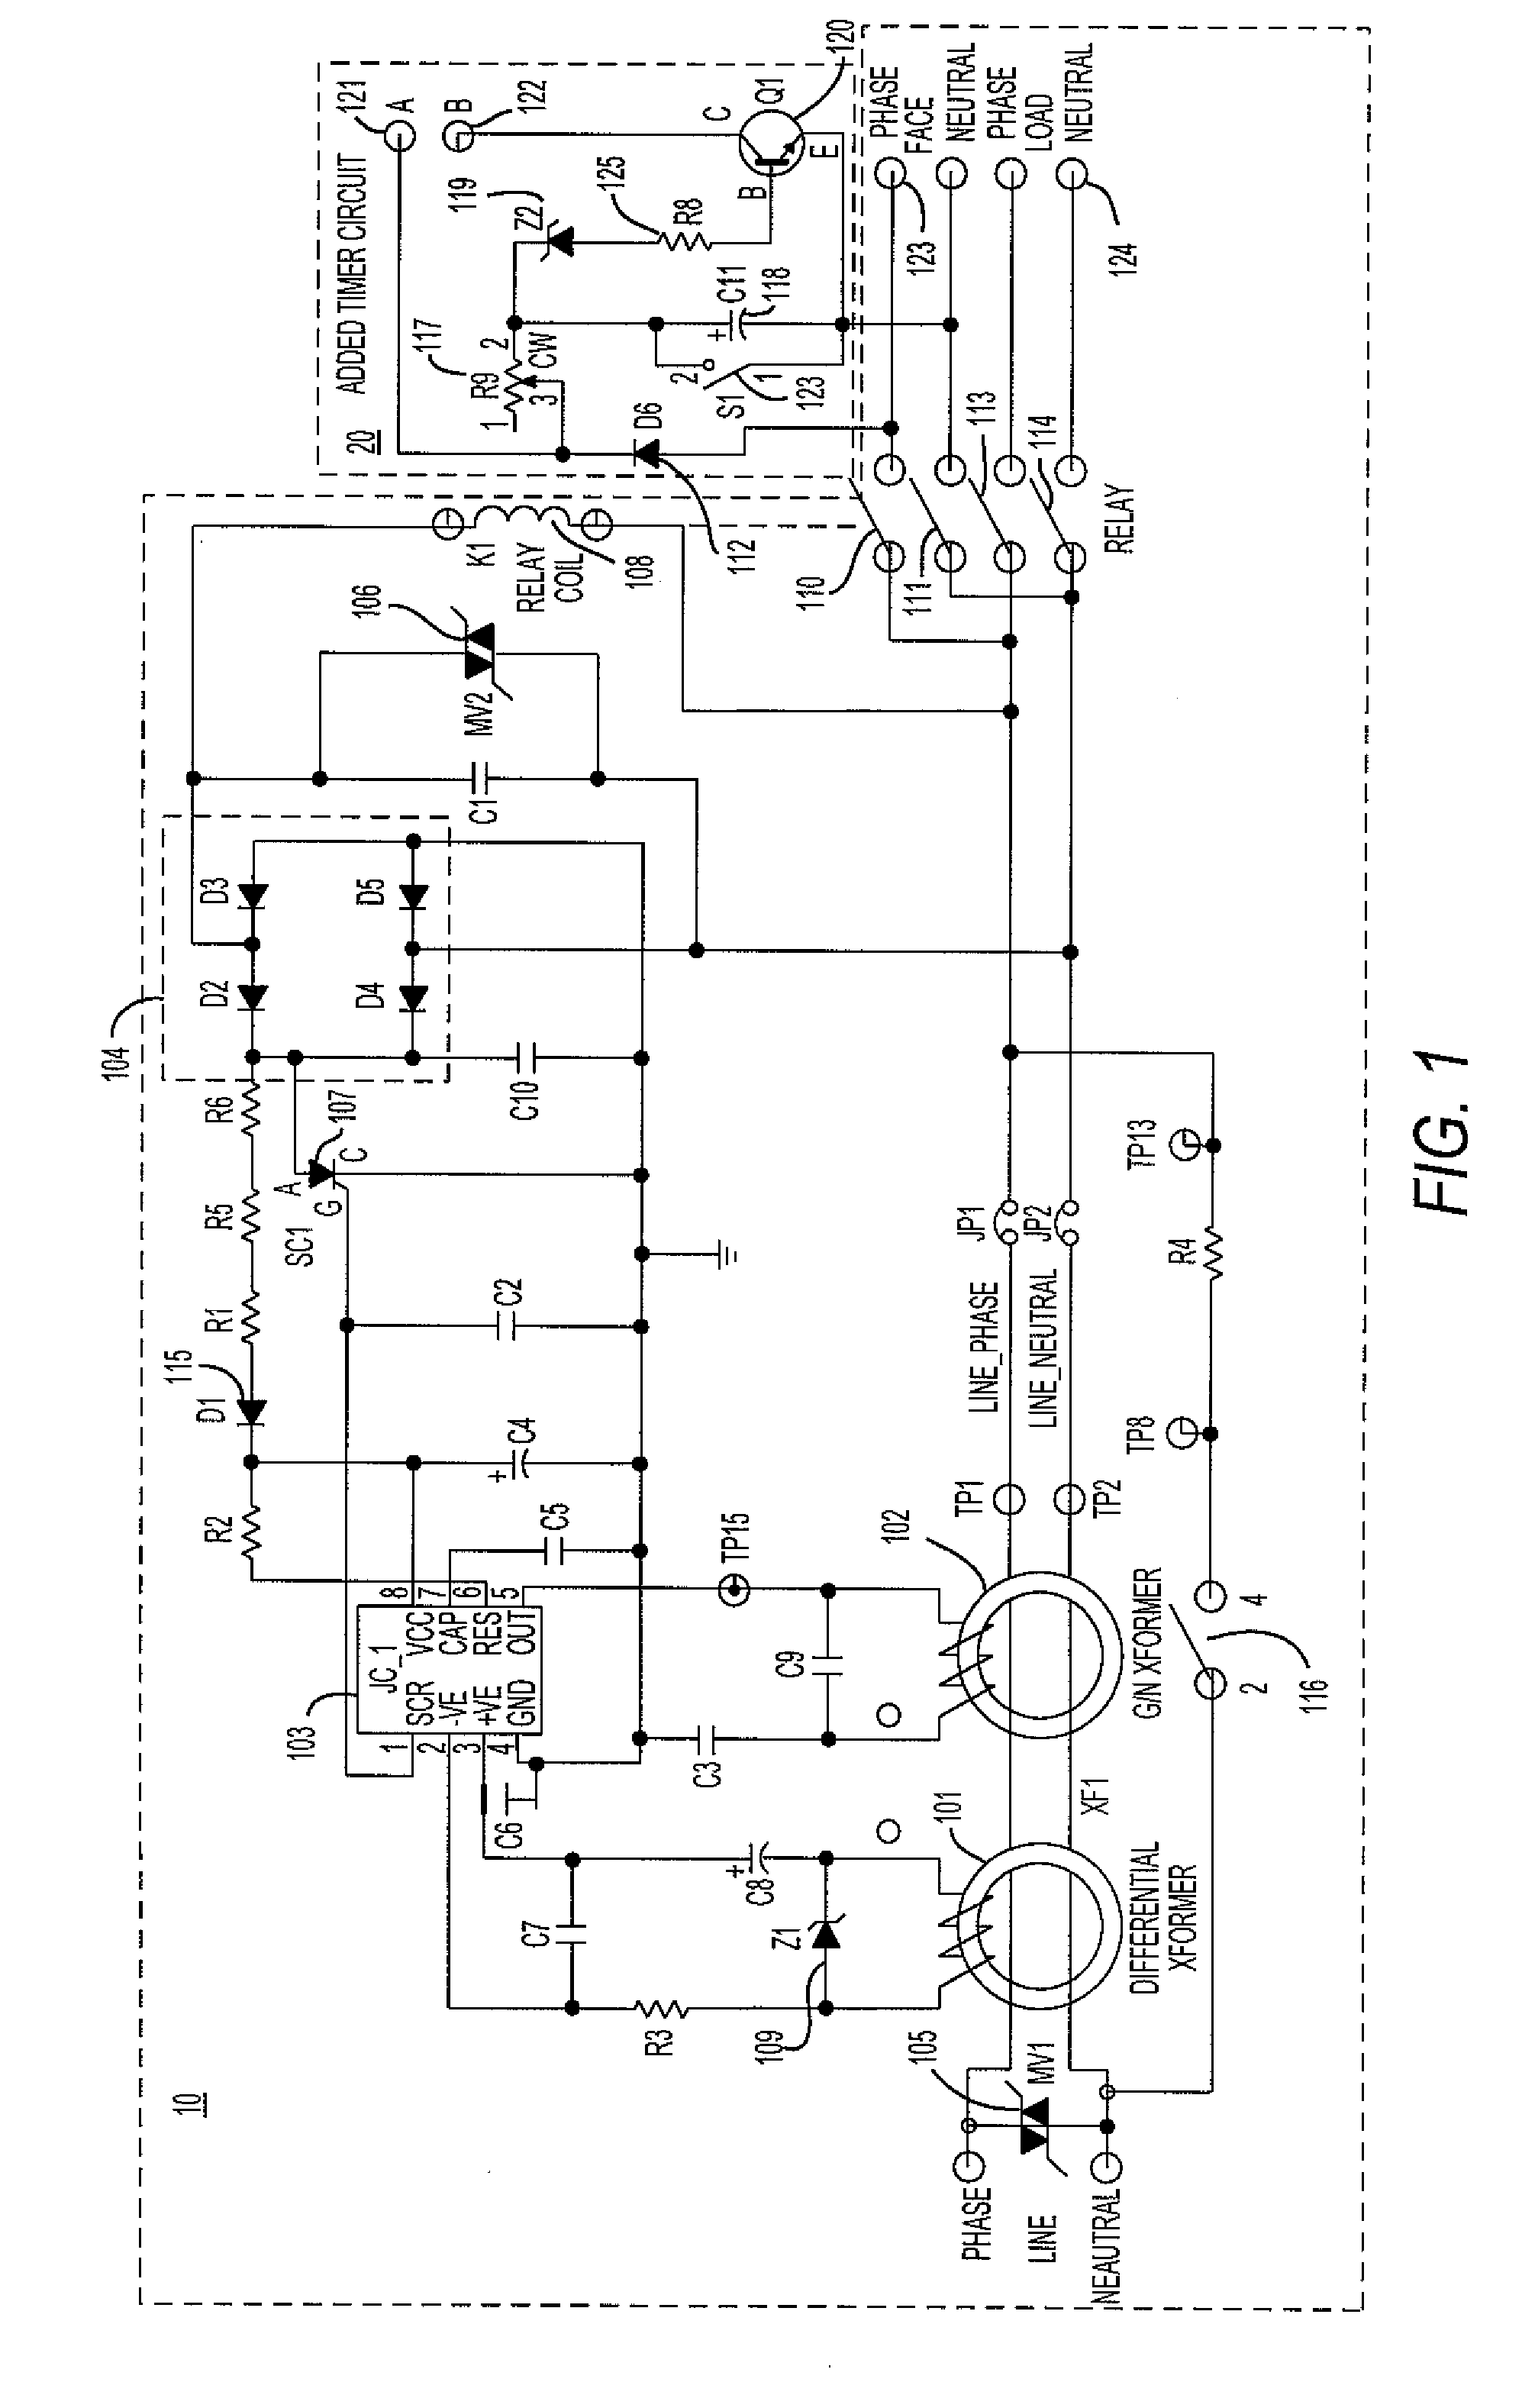 Ground fault circuit interrupter having an integrated variable timer